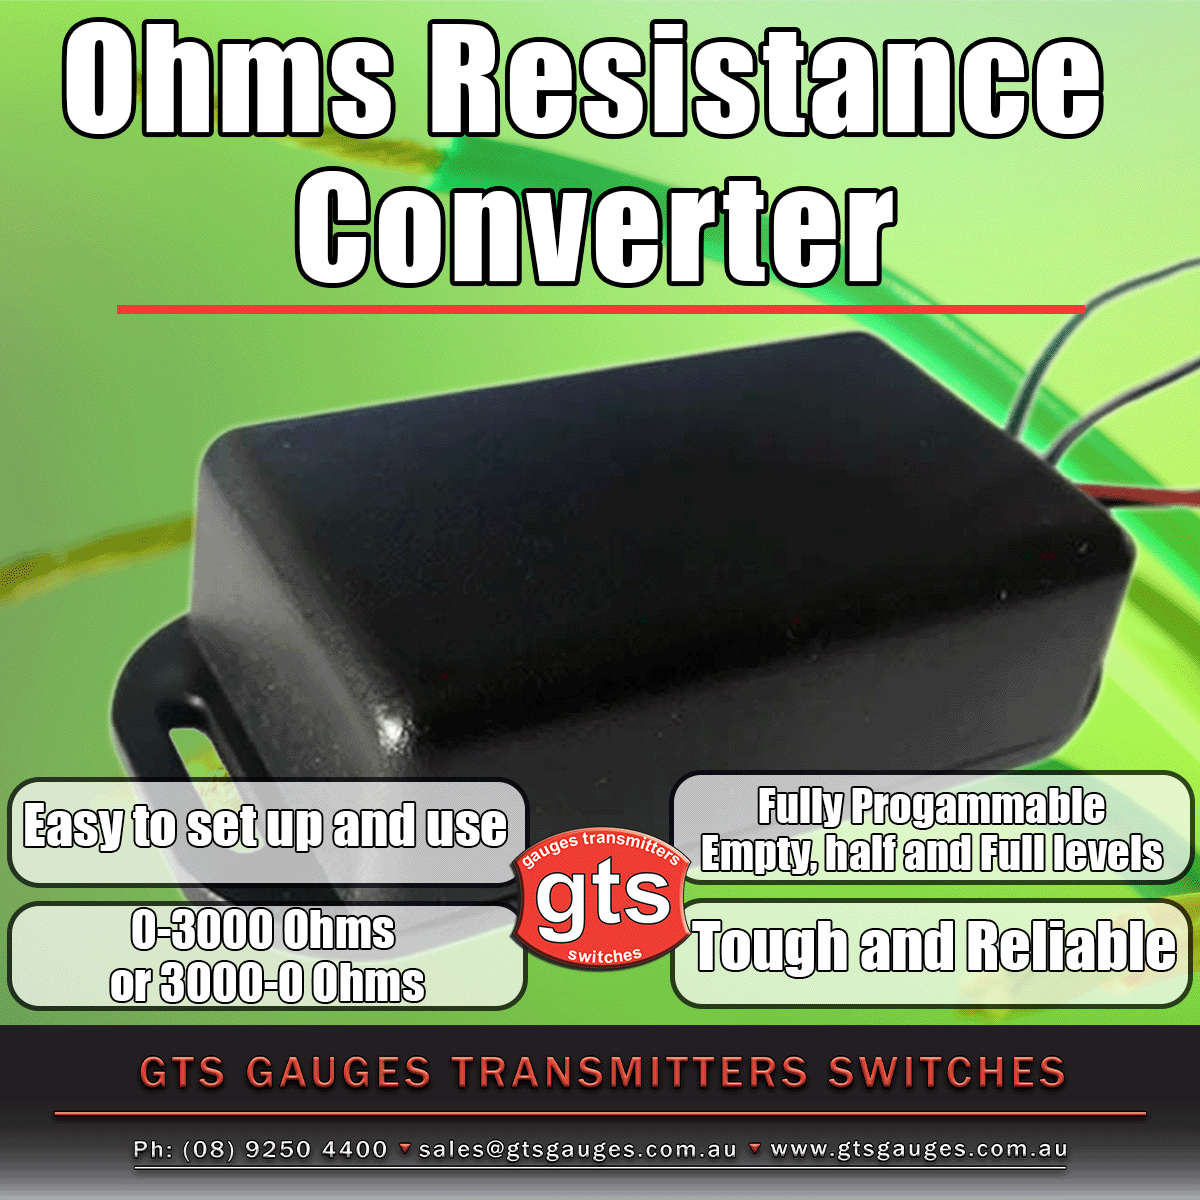 Ohms Resistance Converter - Perfect for vintage cars, hot rods and 4WDs